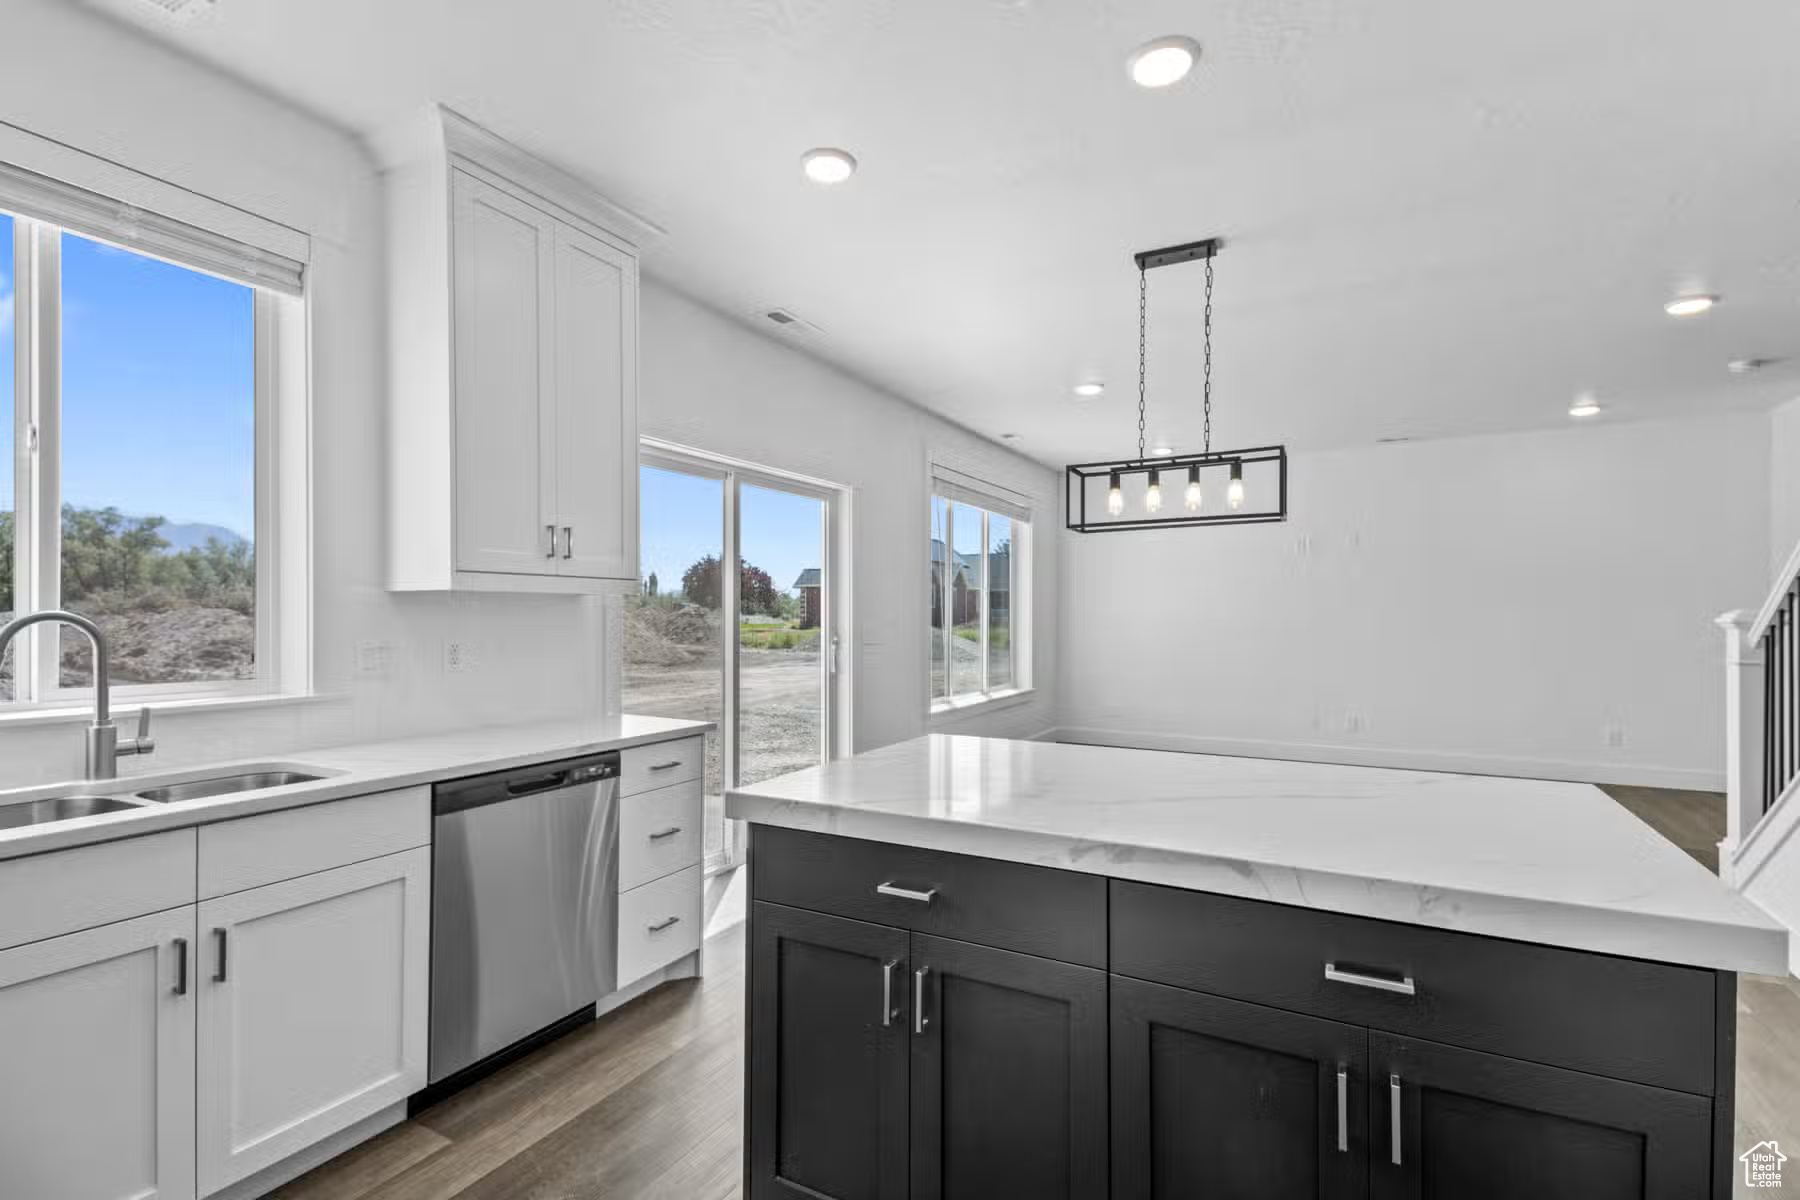 Kitchen with white cabinets, sink, stainless steel dishwasher, hardwood / wood-style flooring, and pendant lighting